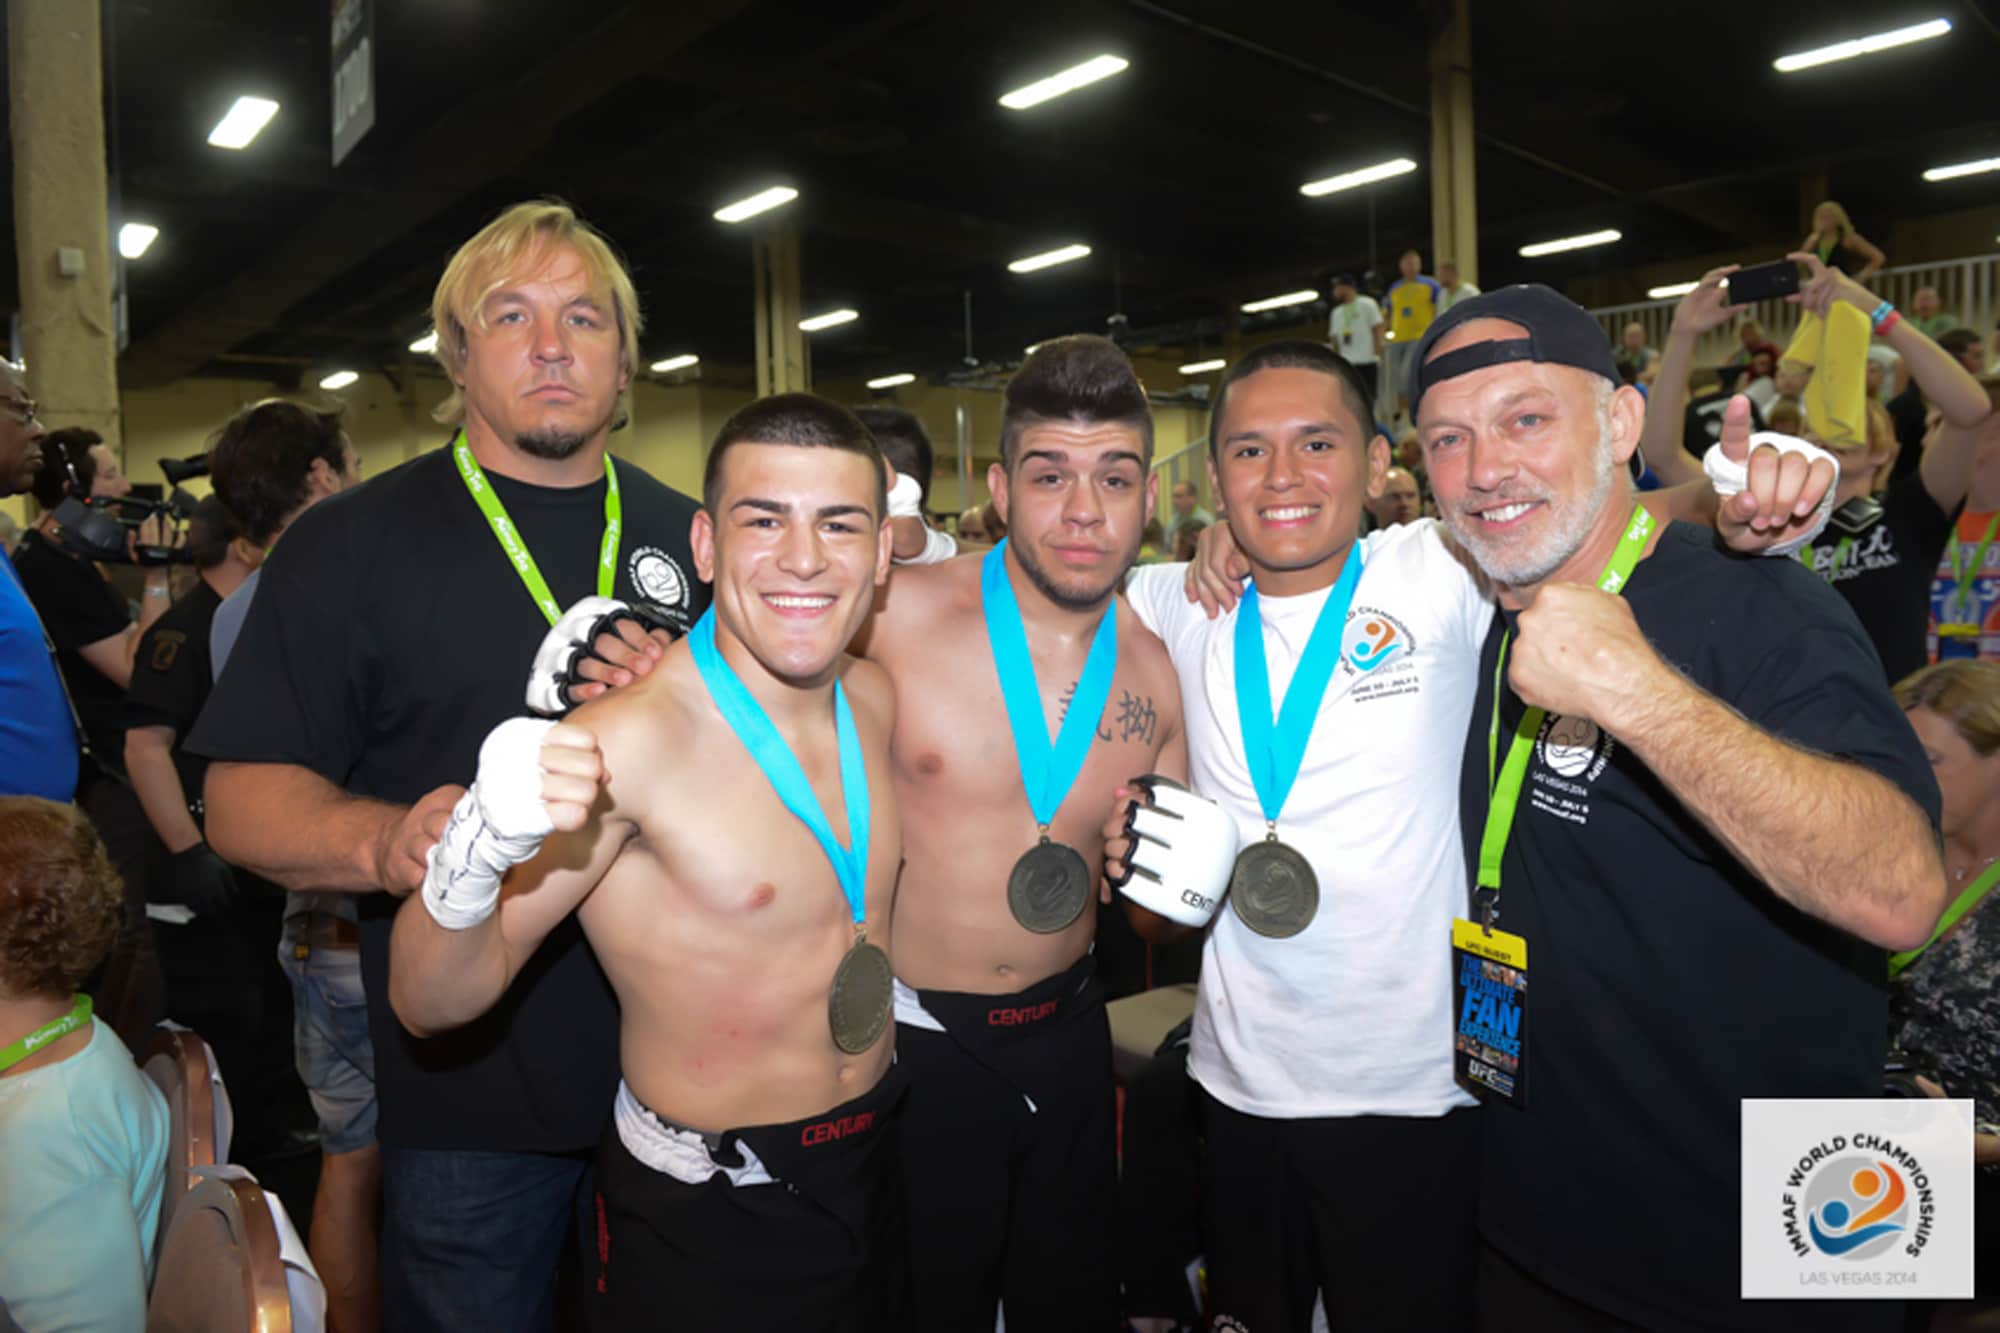 Mariscal’s pro career has its roots in first ever IMMAF World Champs